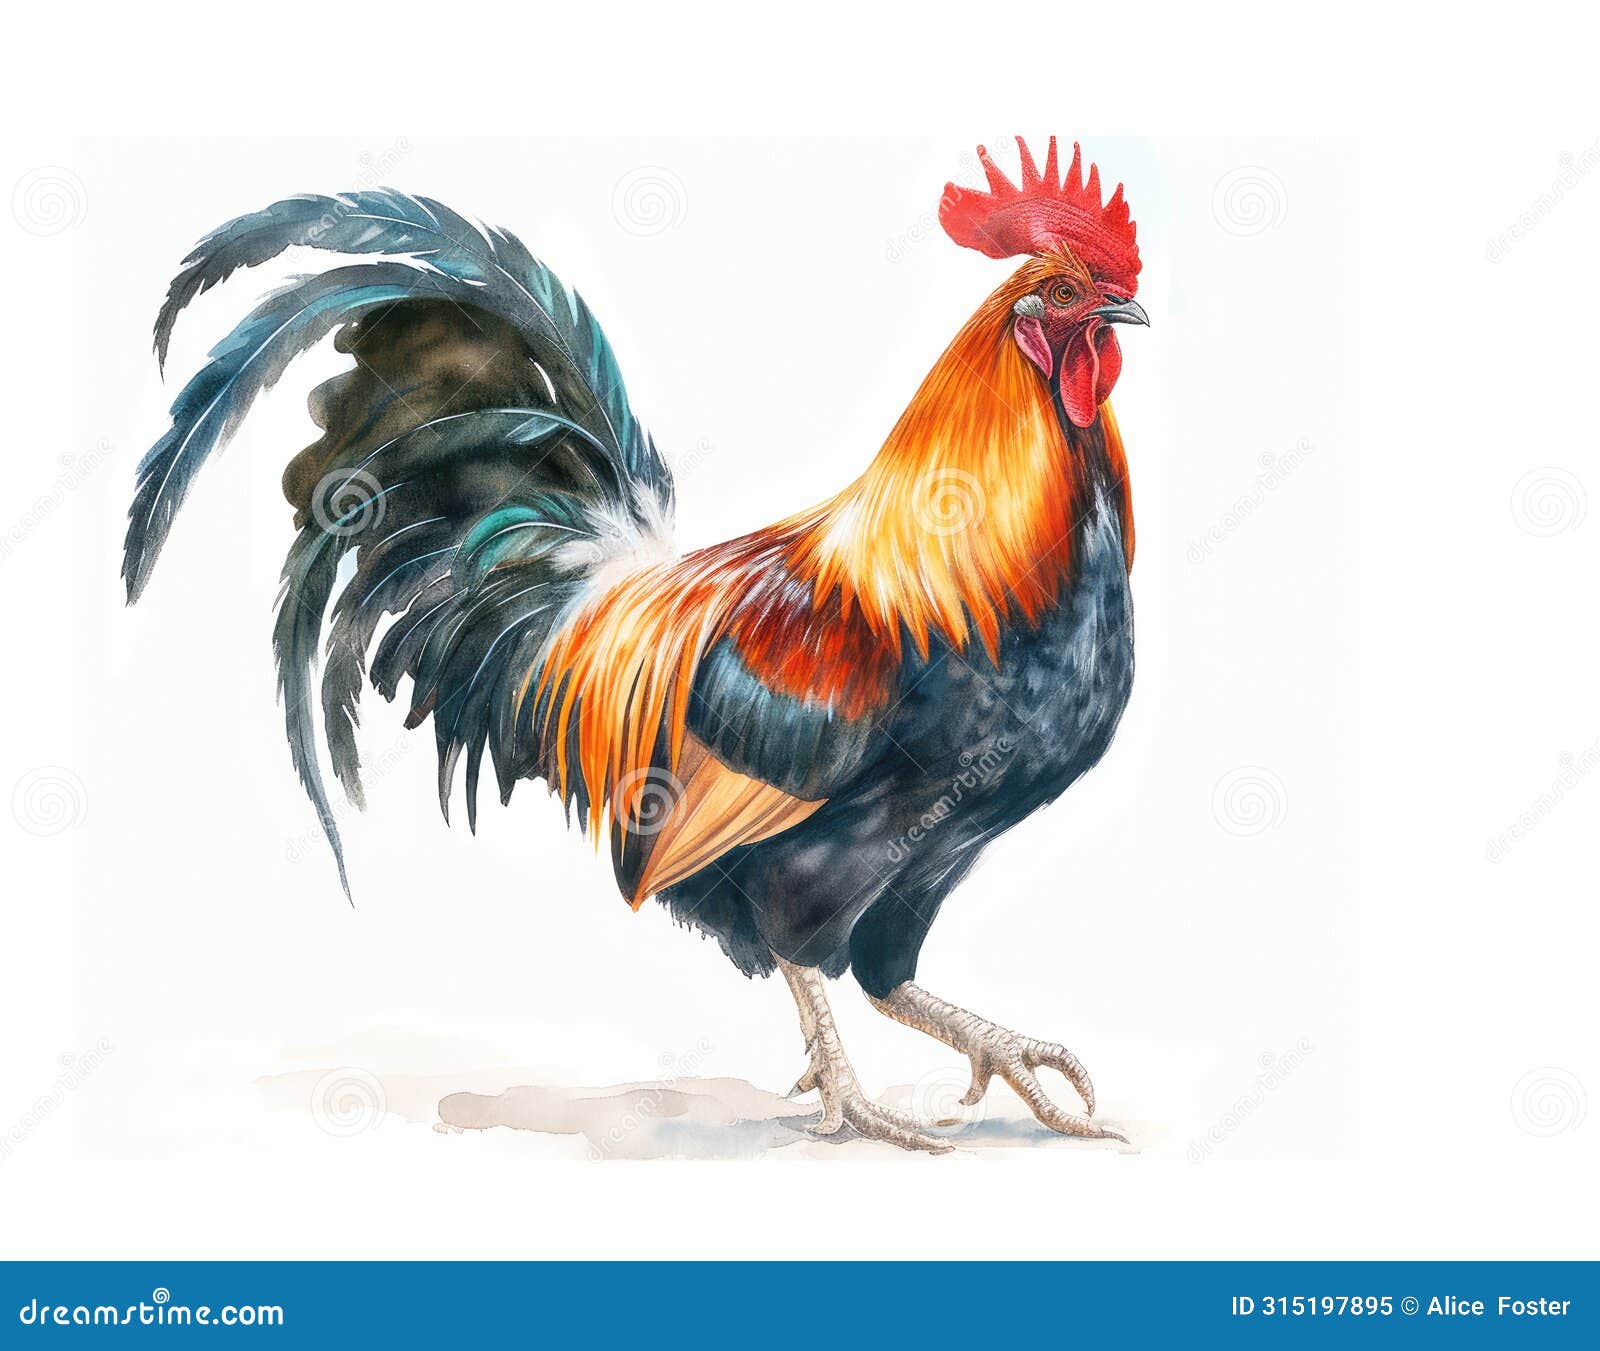 galician rooster.  of france.   on white background.